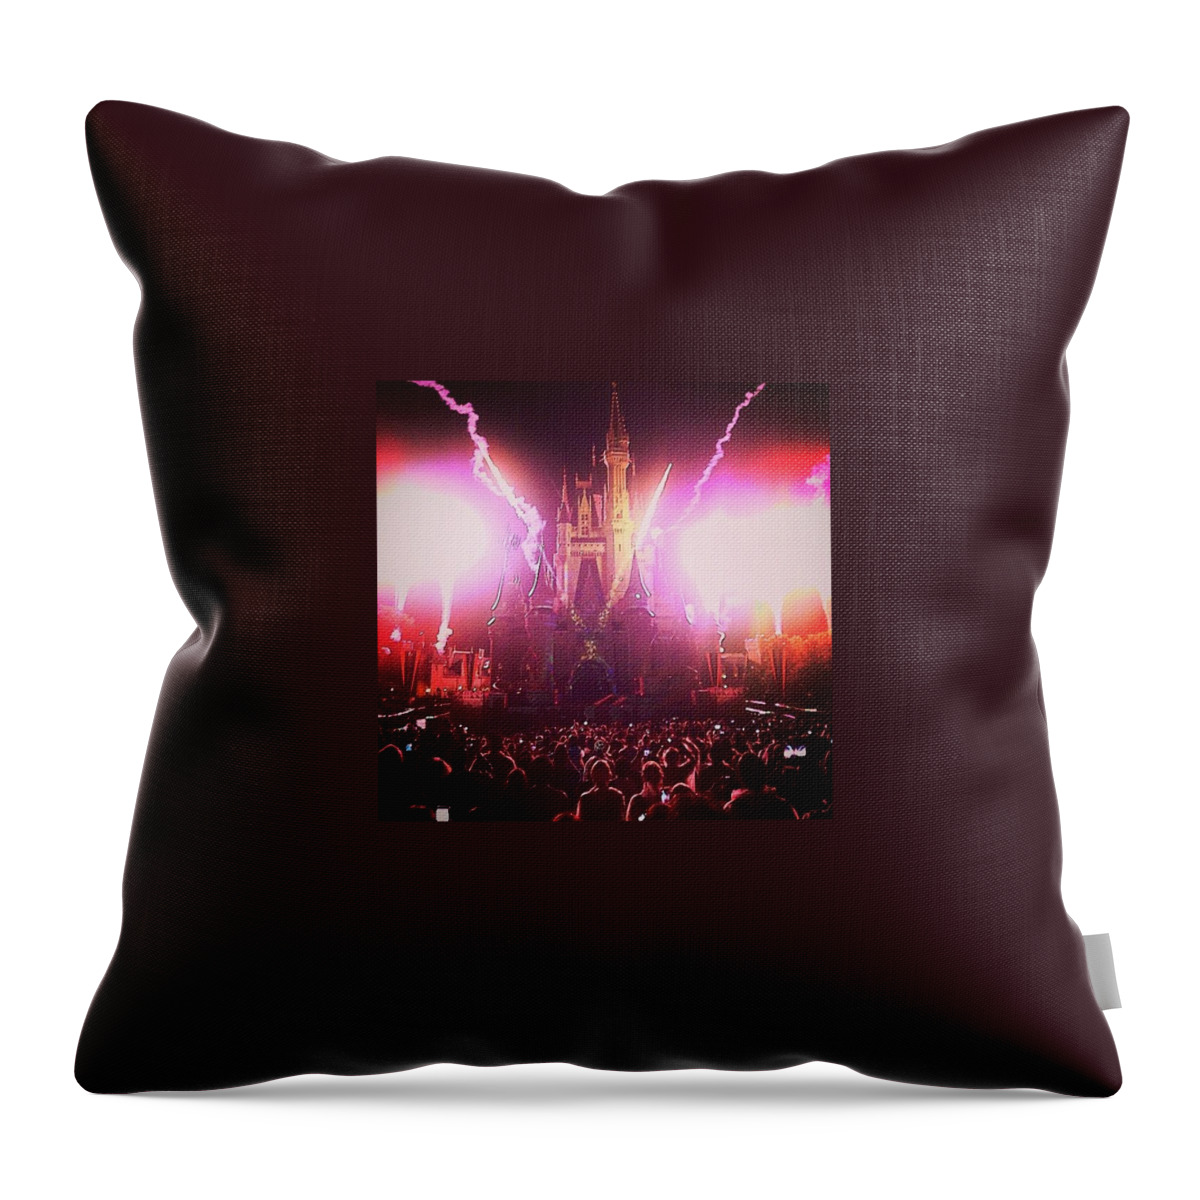 Crowd Throw Pillow featuring the photograph Illumination by Kate Arsenault 